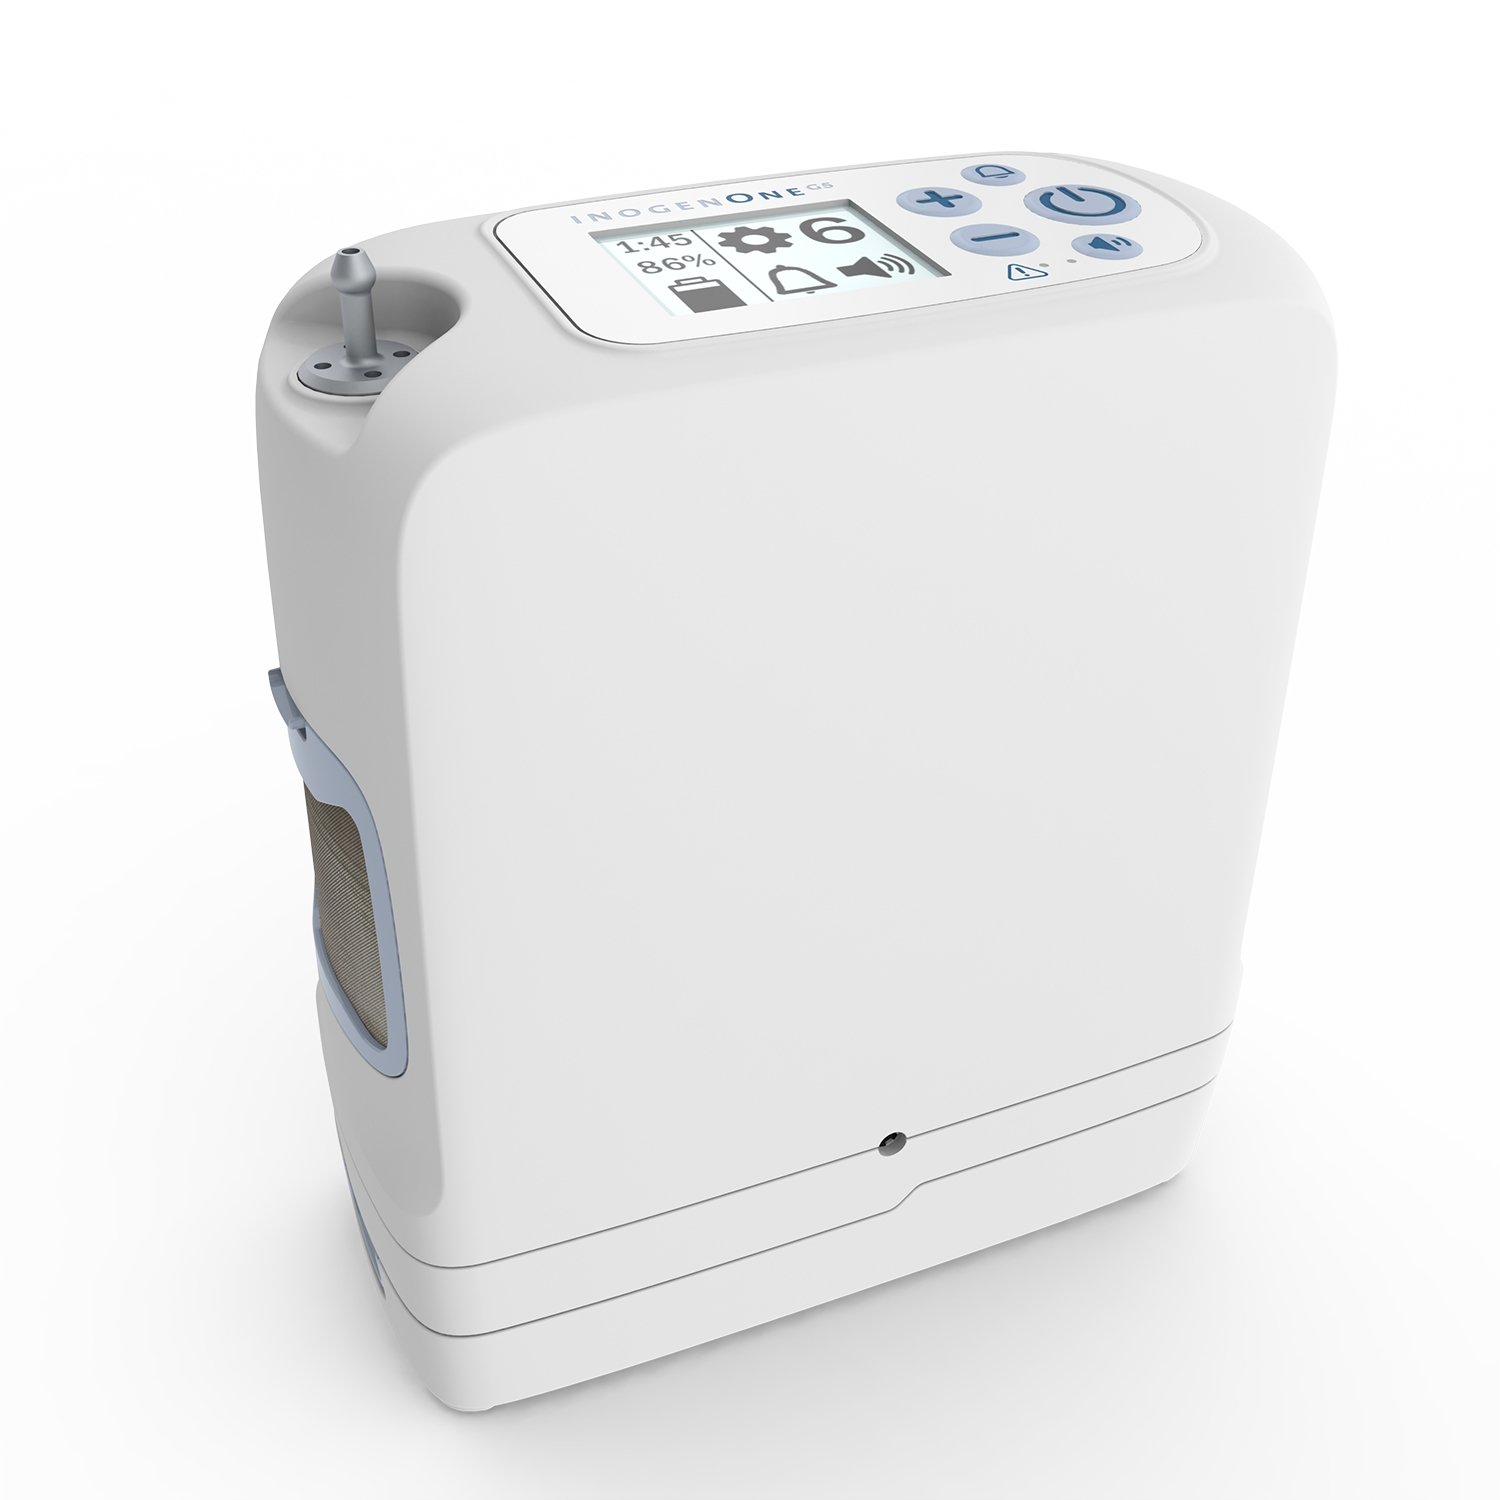 Brand NEW Inogen One G5 Single Battery Oxygen Concentrator